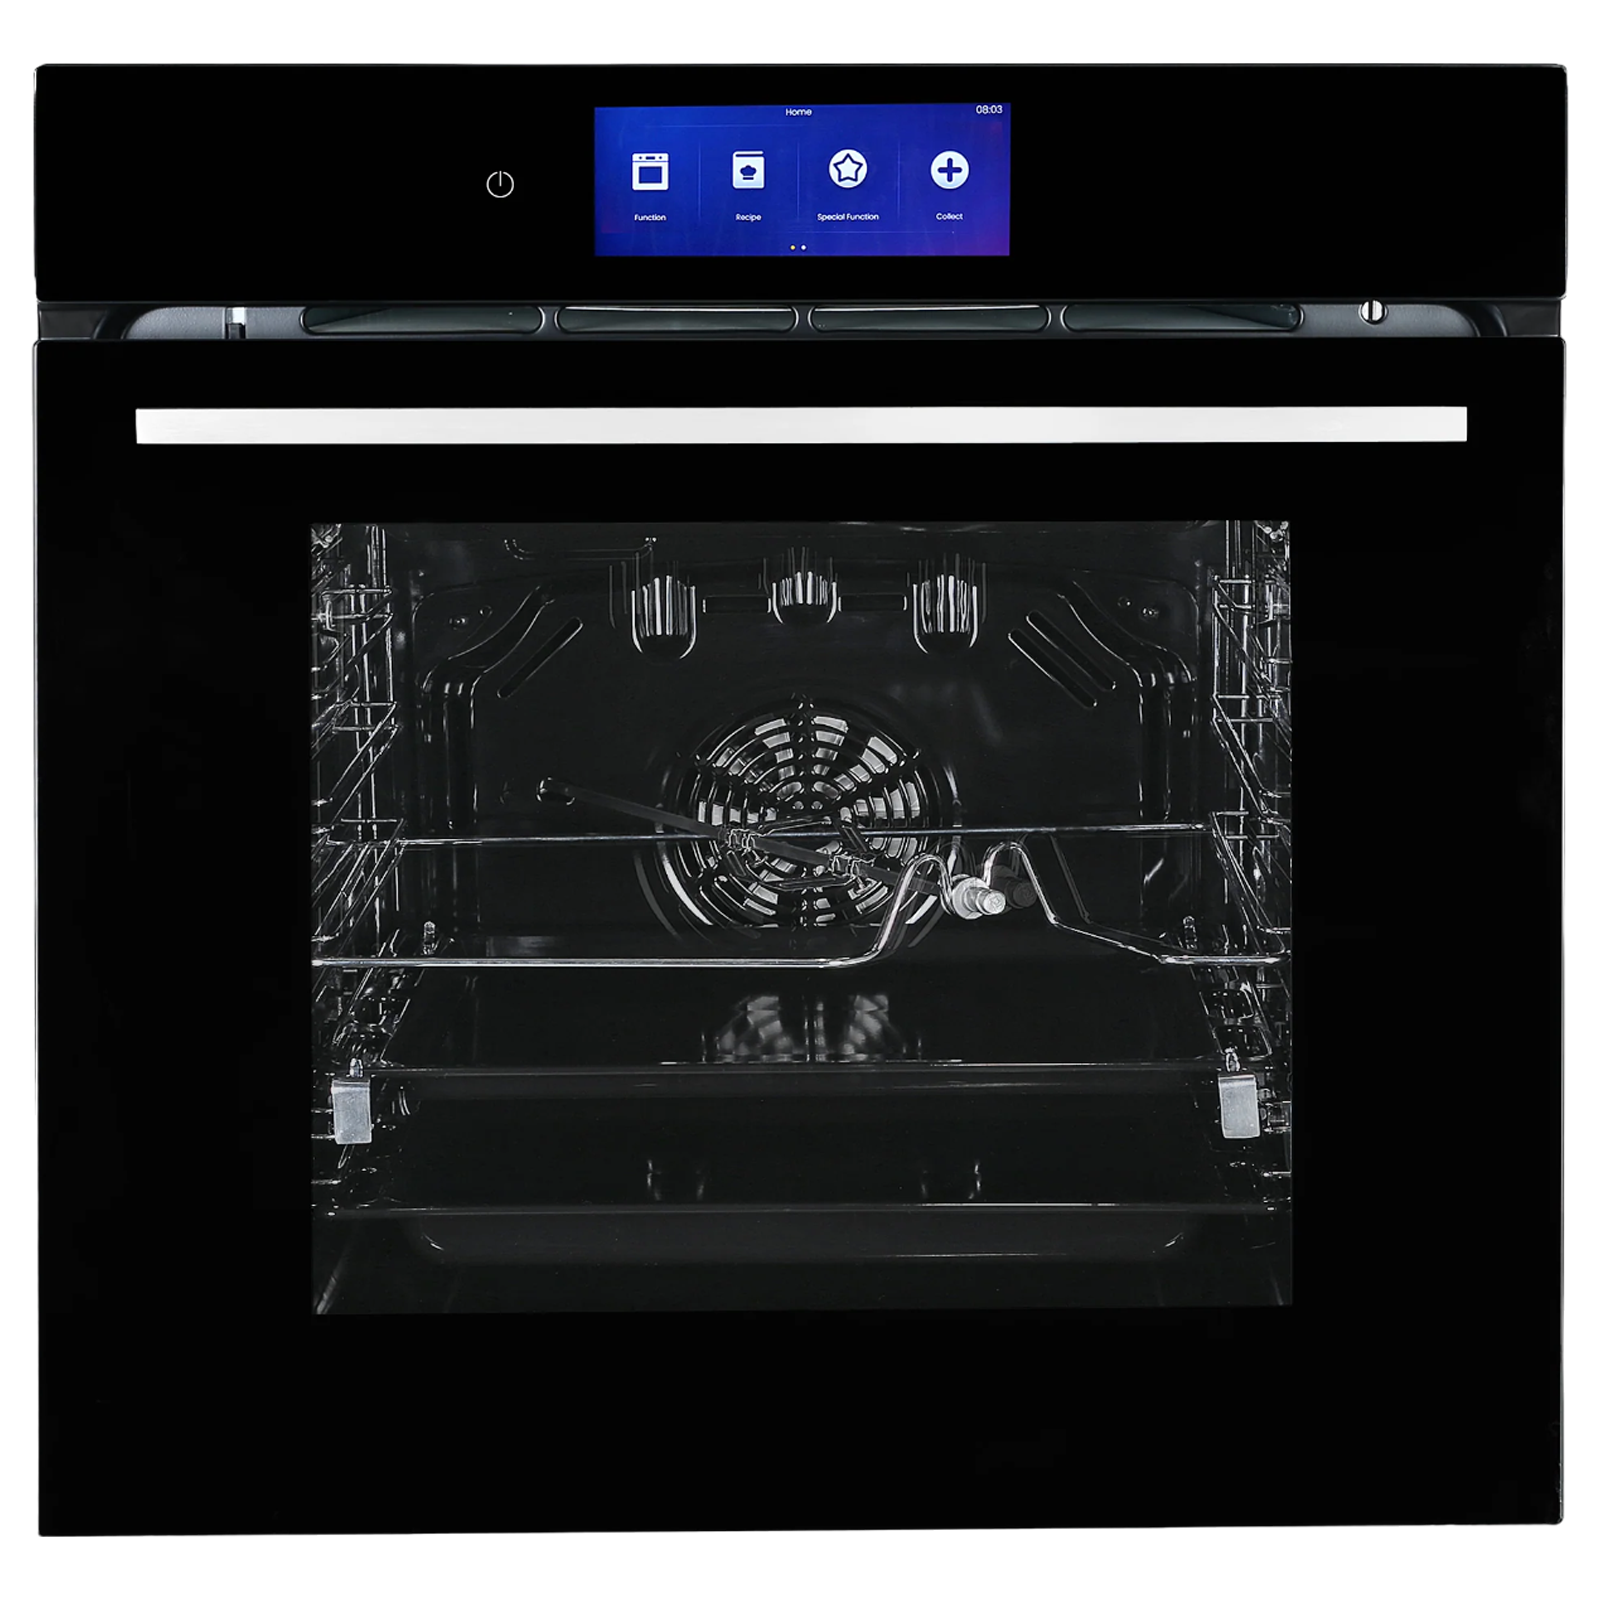 

FABER FBIO 83L Convection Oven with 3D Hot Air Circulation System (Black)